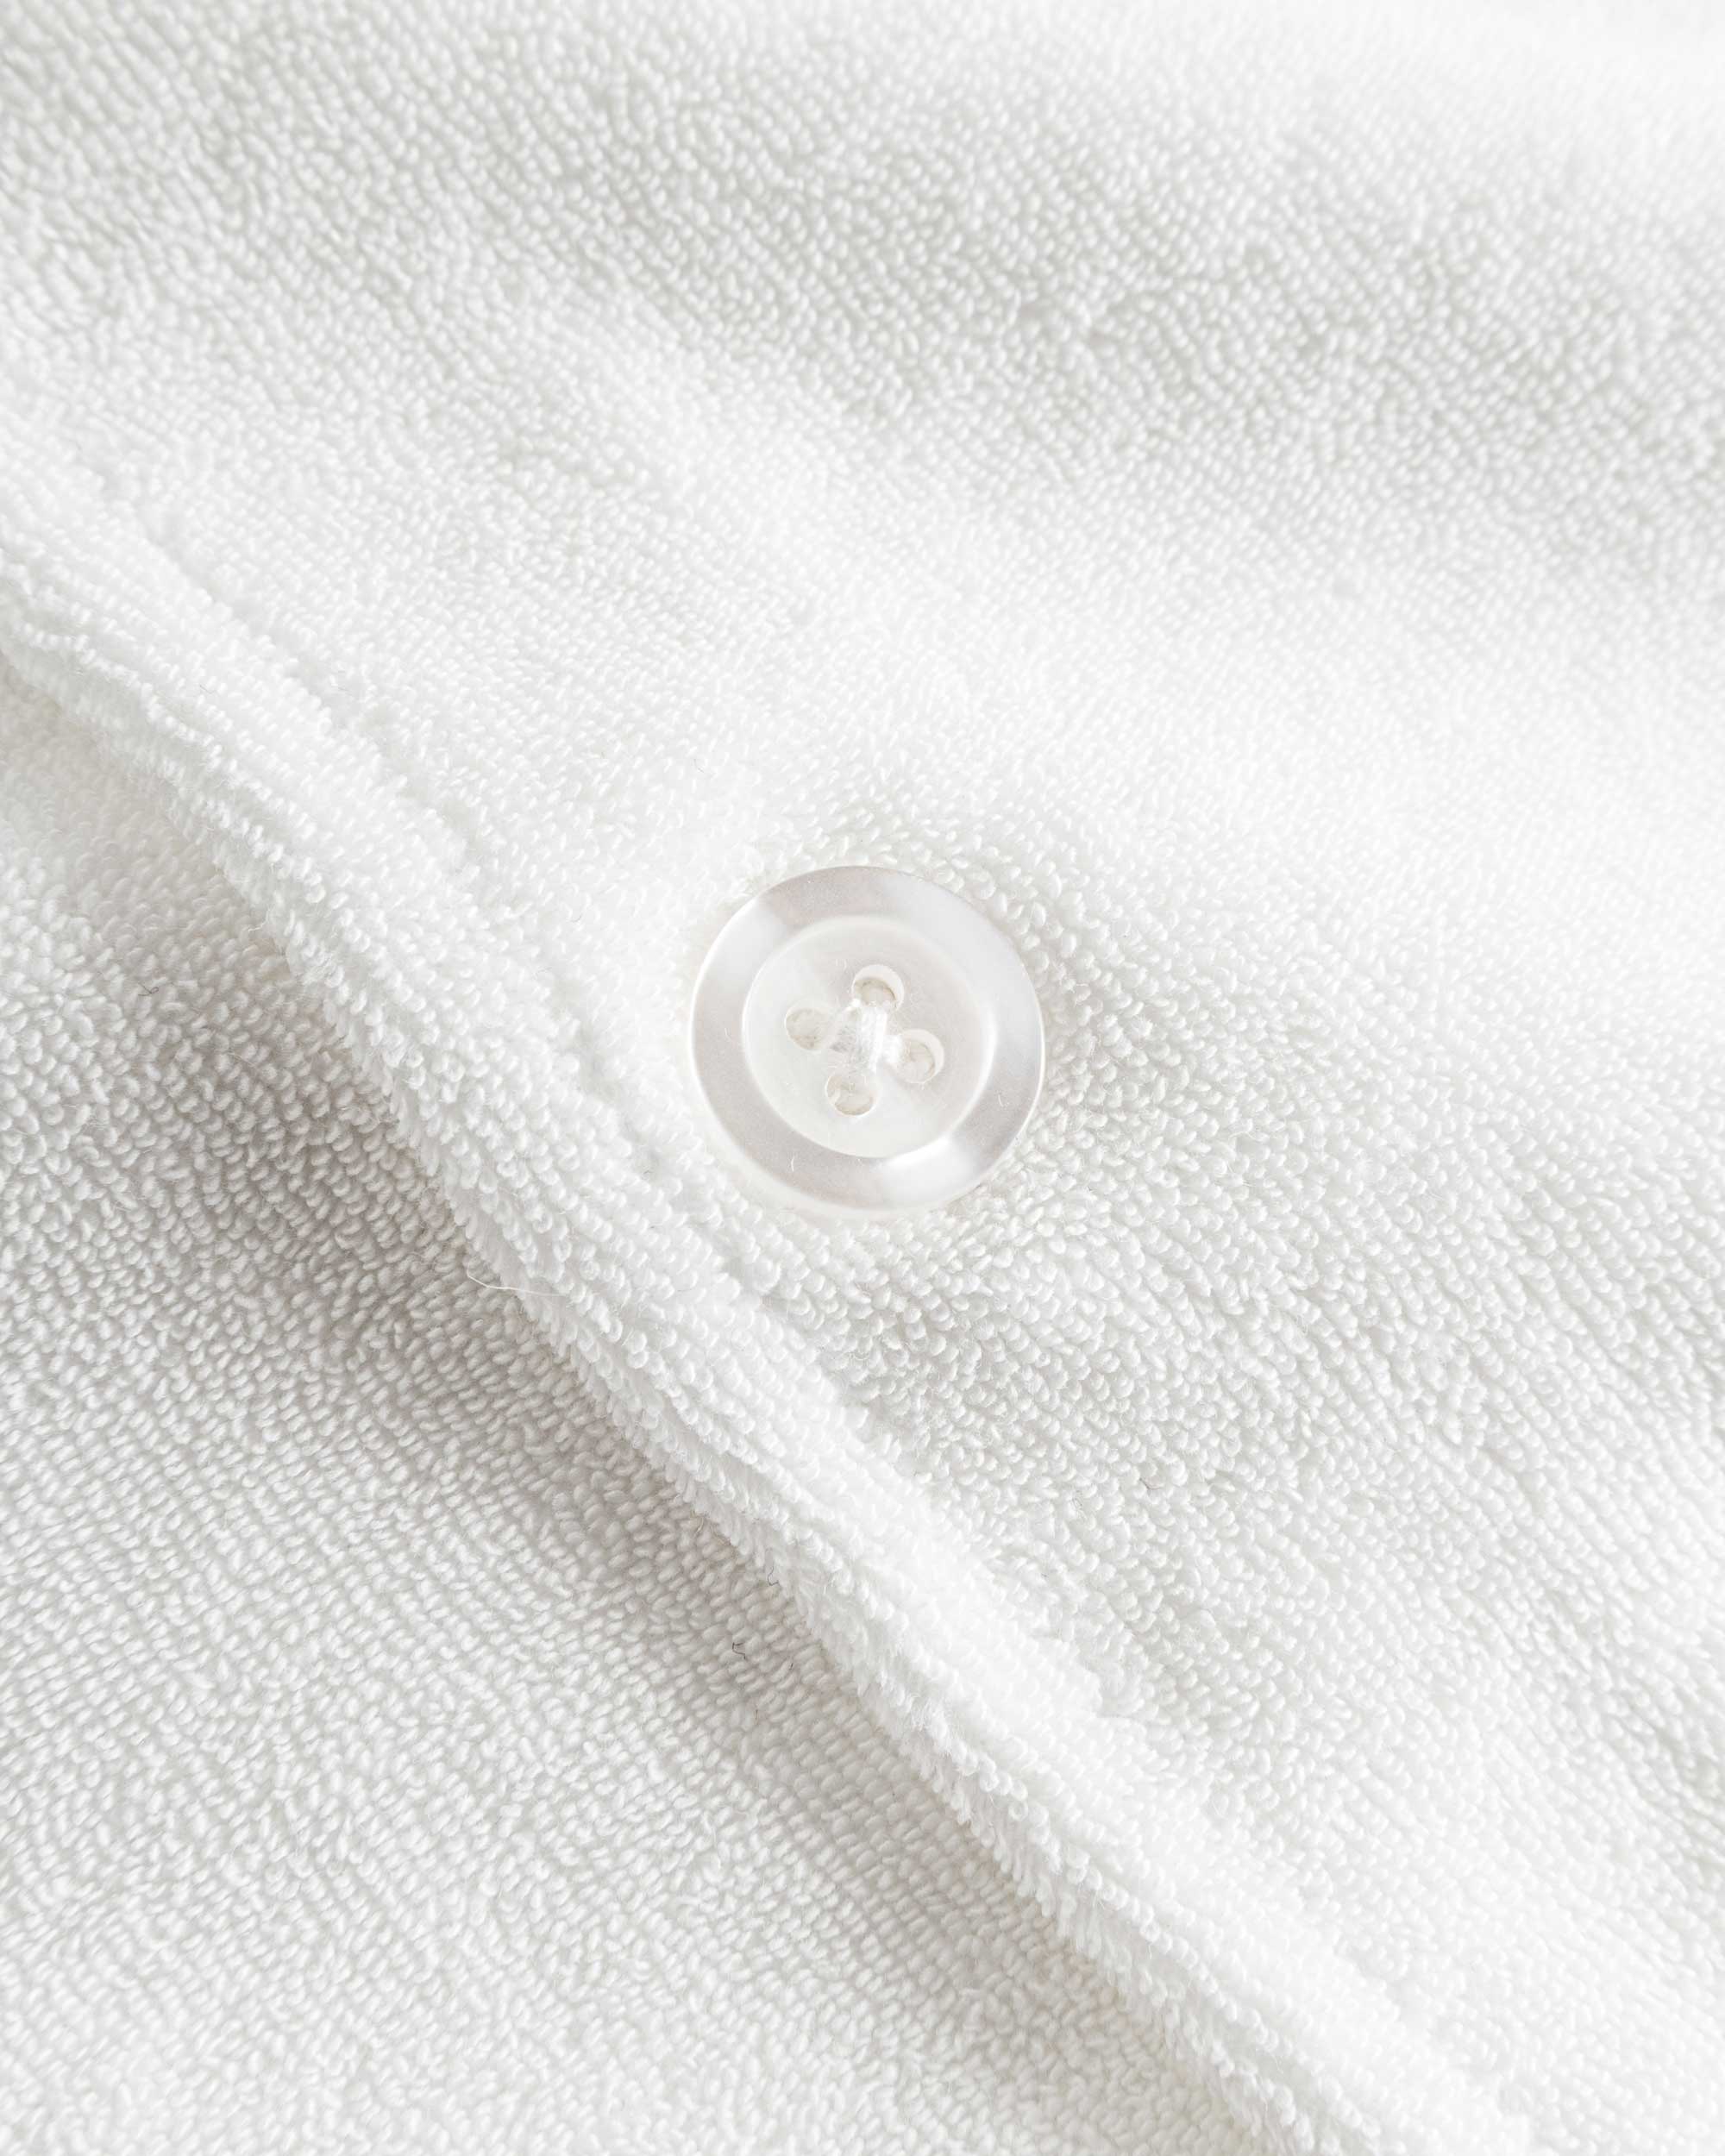 Close up of white pearl button on an off white short sleeve shirt.